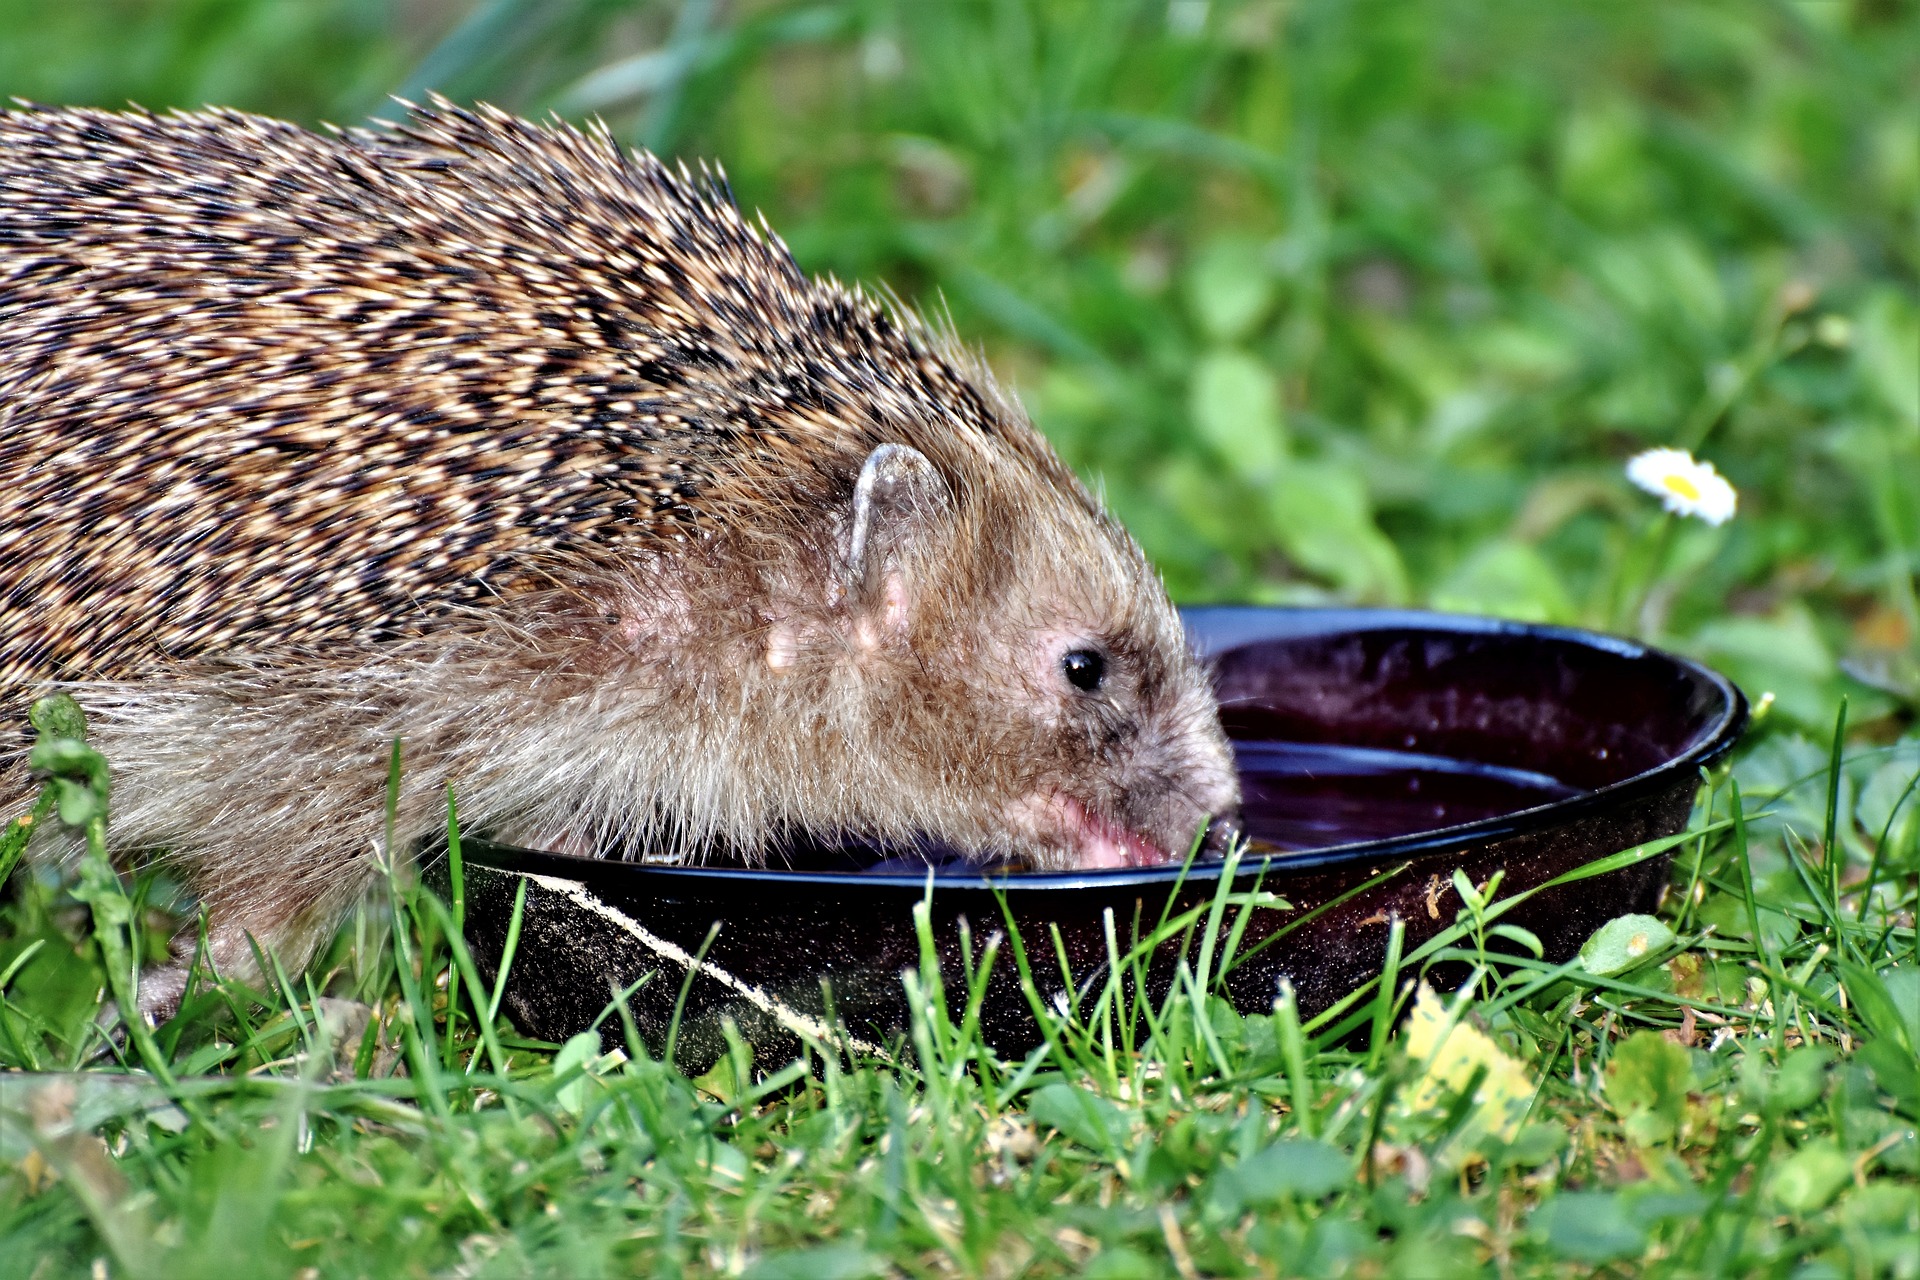 A hedgehog drinking water out of a bowl on some grass.